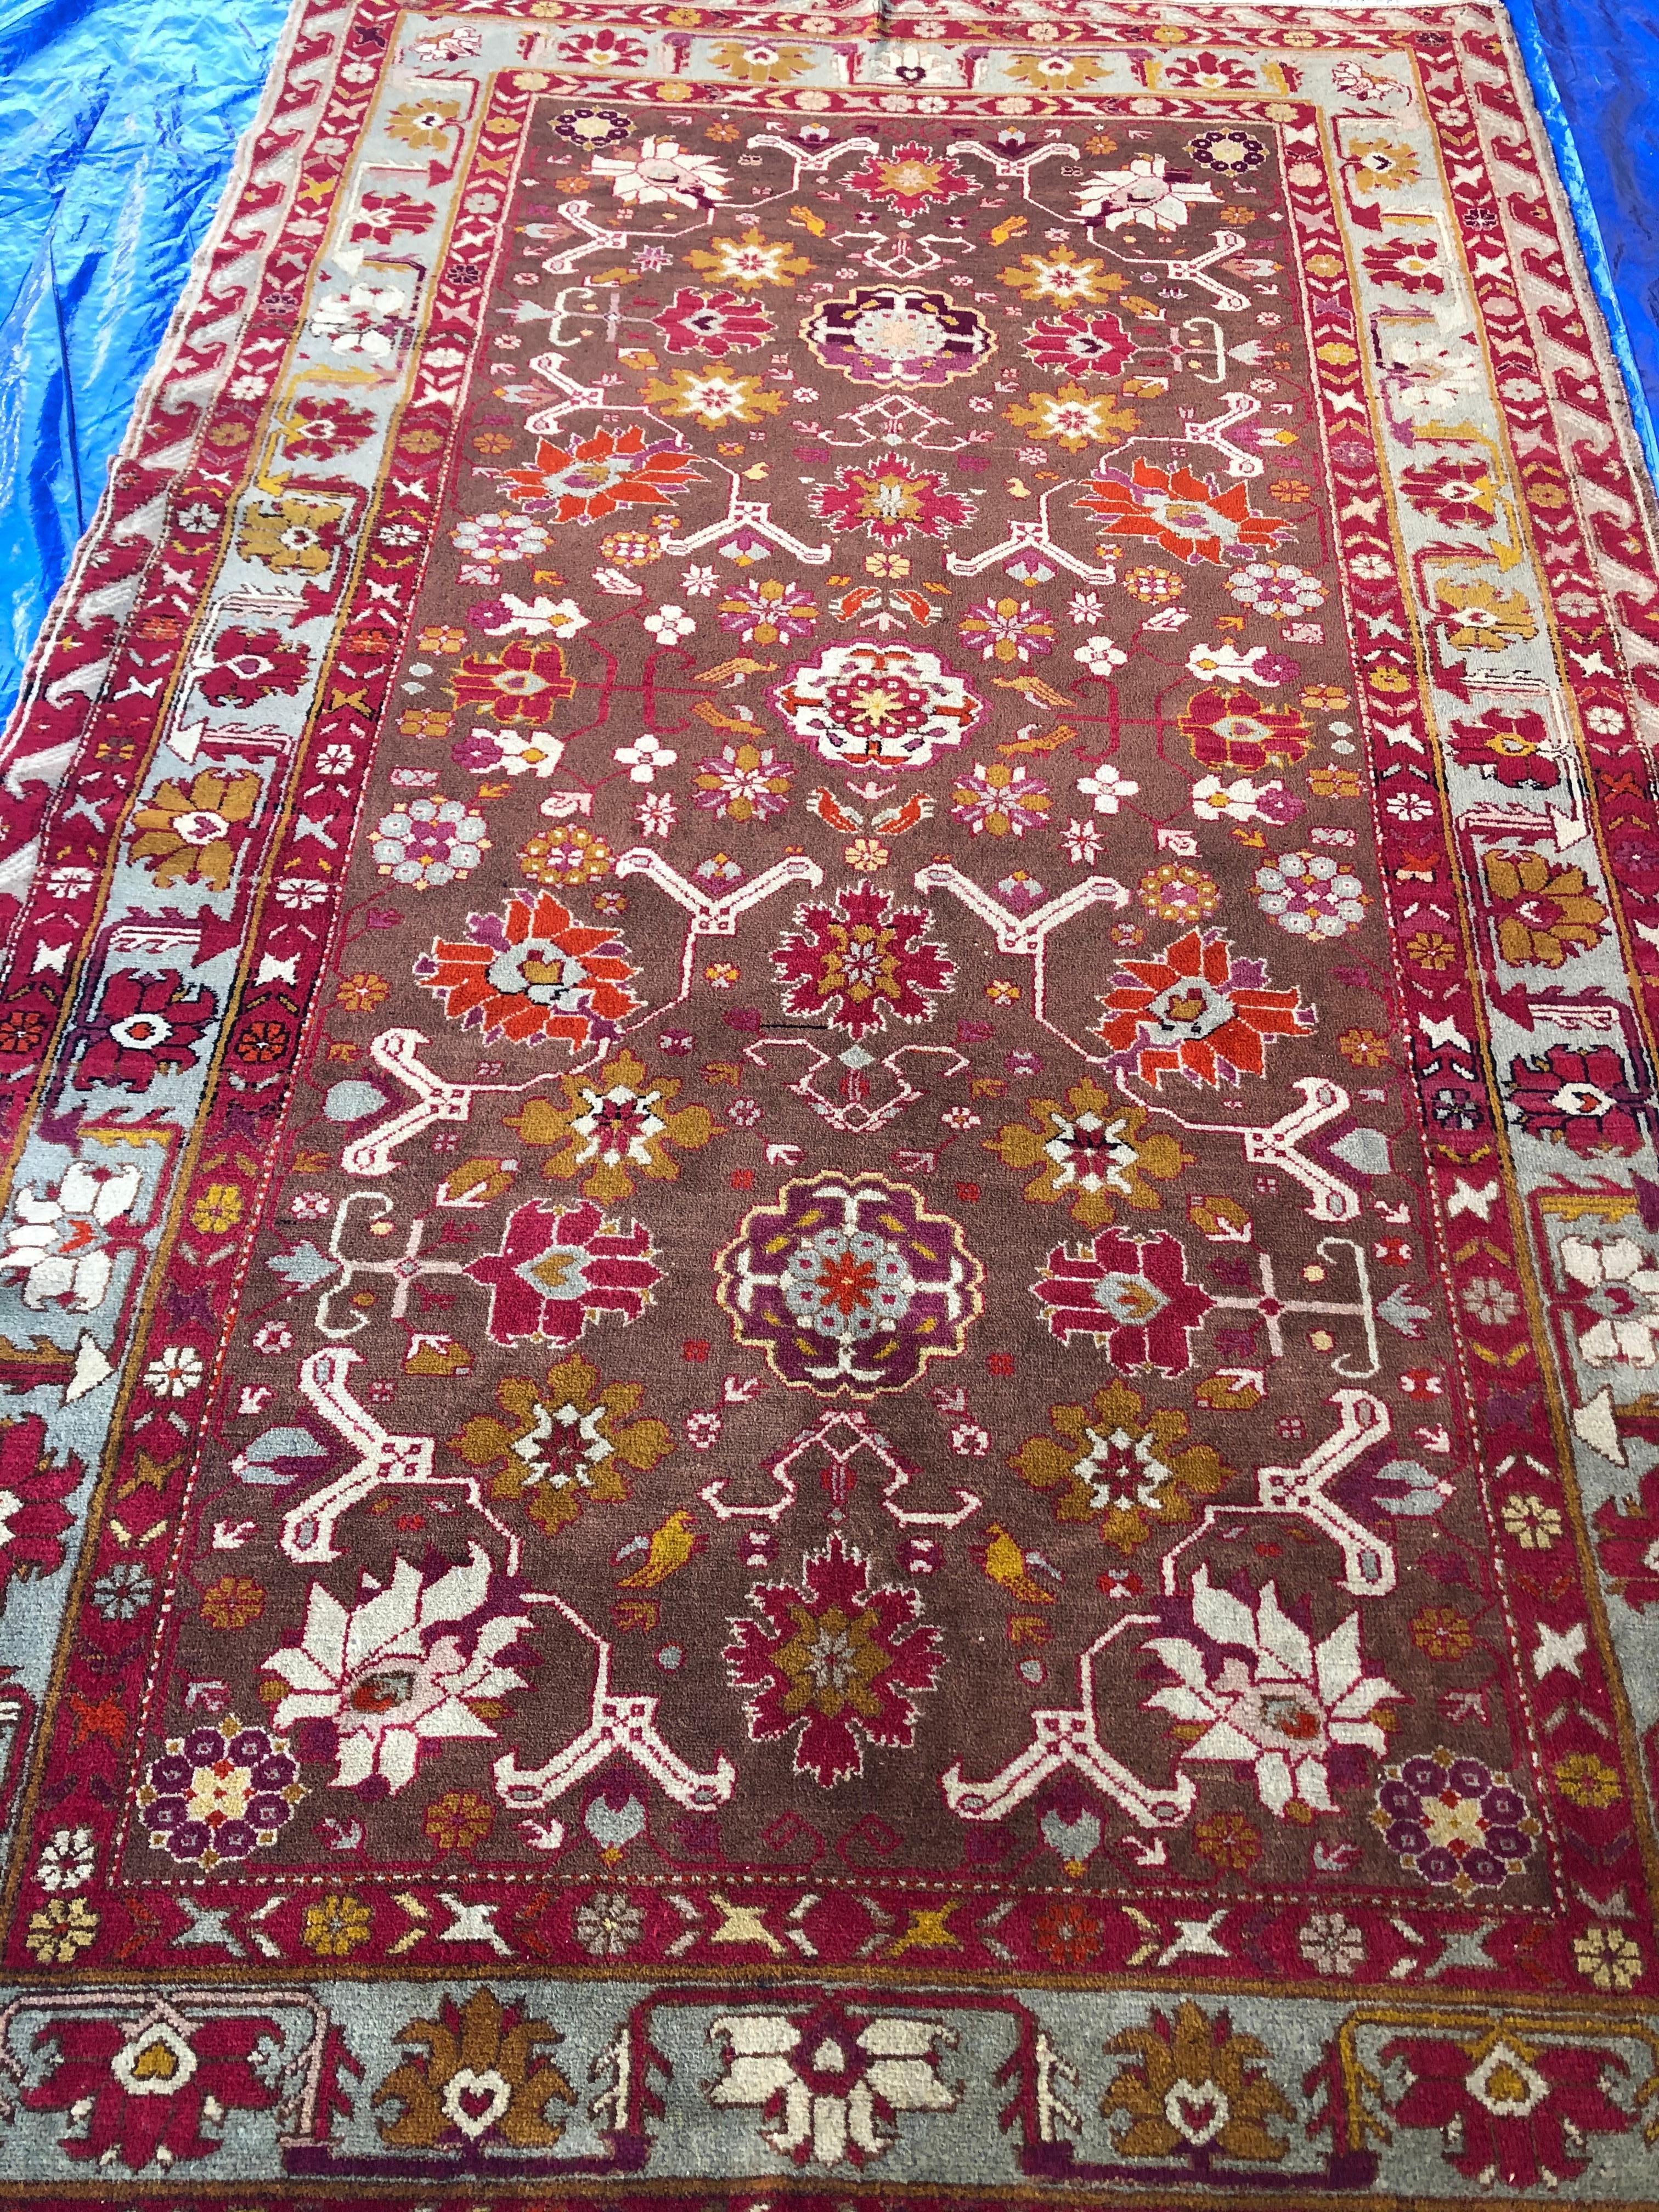 Fine antique tribal Caucasian rug from Dagestan formerly know as Baguestan. This geometric rug has excellent color combinations and the contrasting blue, red, beige and rust colors, are very pleasing to the eye. 
Antique rugs of this type date back